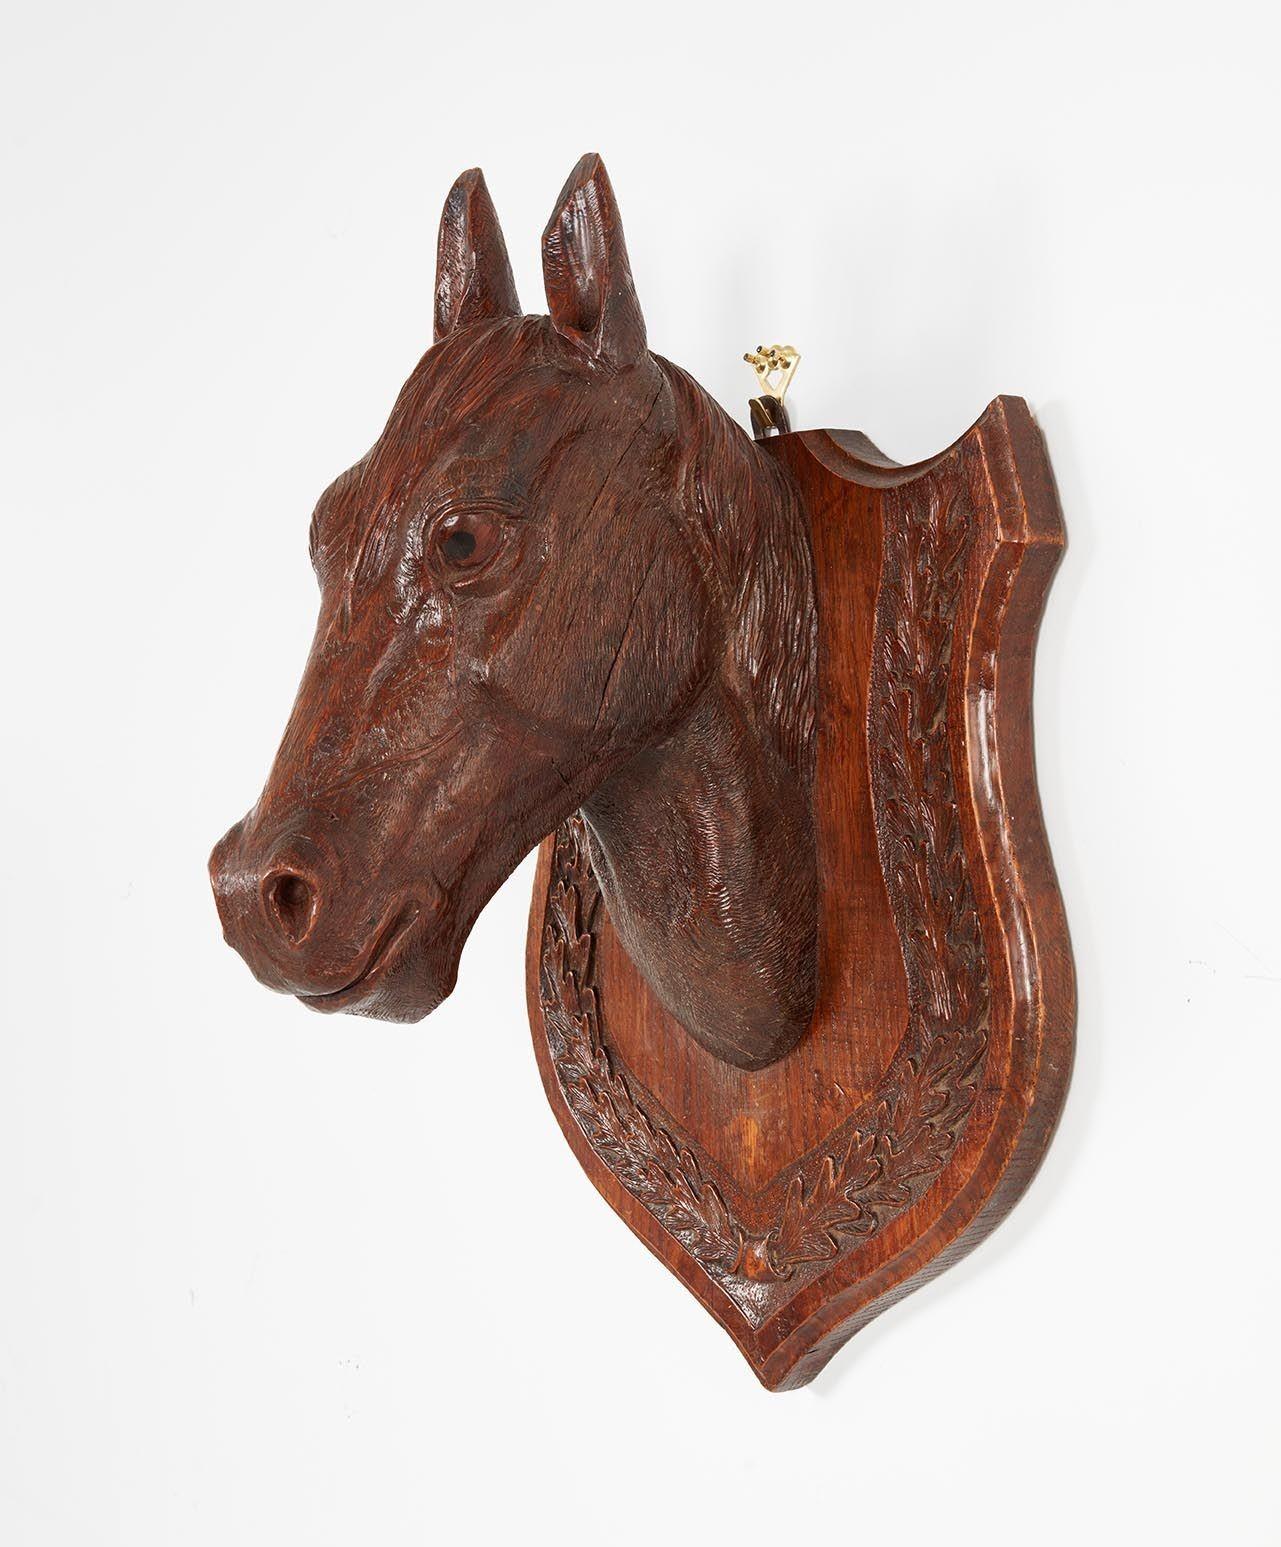 An equestrian stable mascot of a champion horse, finely sculpted in English oak, capturing his alert, expressive face, with great attention to detail. Glass eyes. Mounted on a shield with carved laurel wreath border. Very good patina.